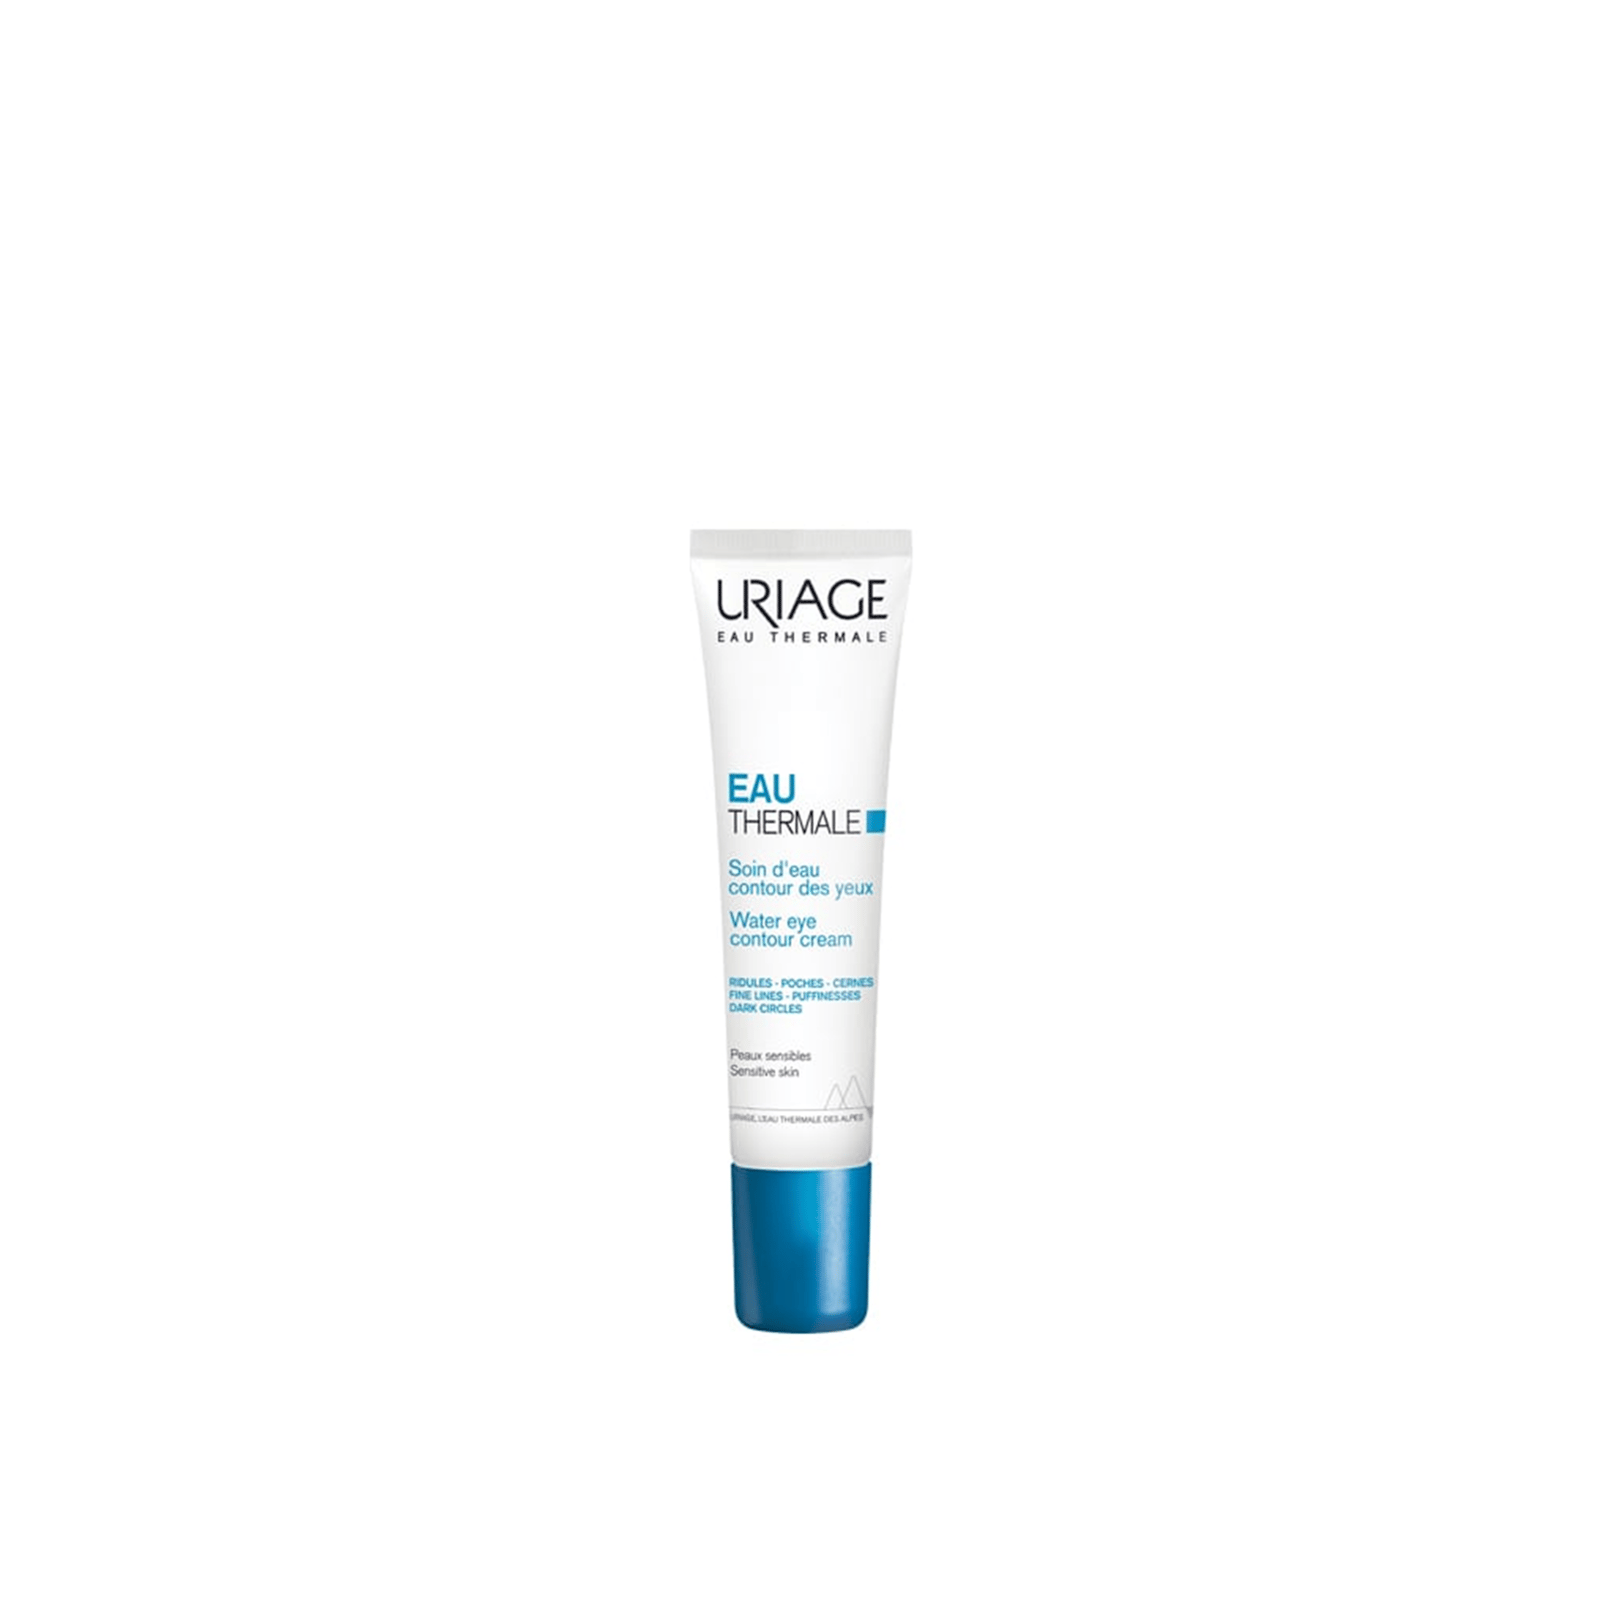 Uriage Eau Thermale Creme Contorno Olhos 15ml